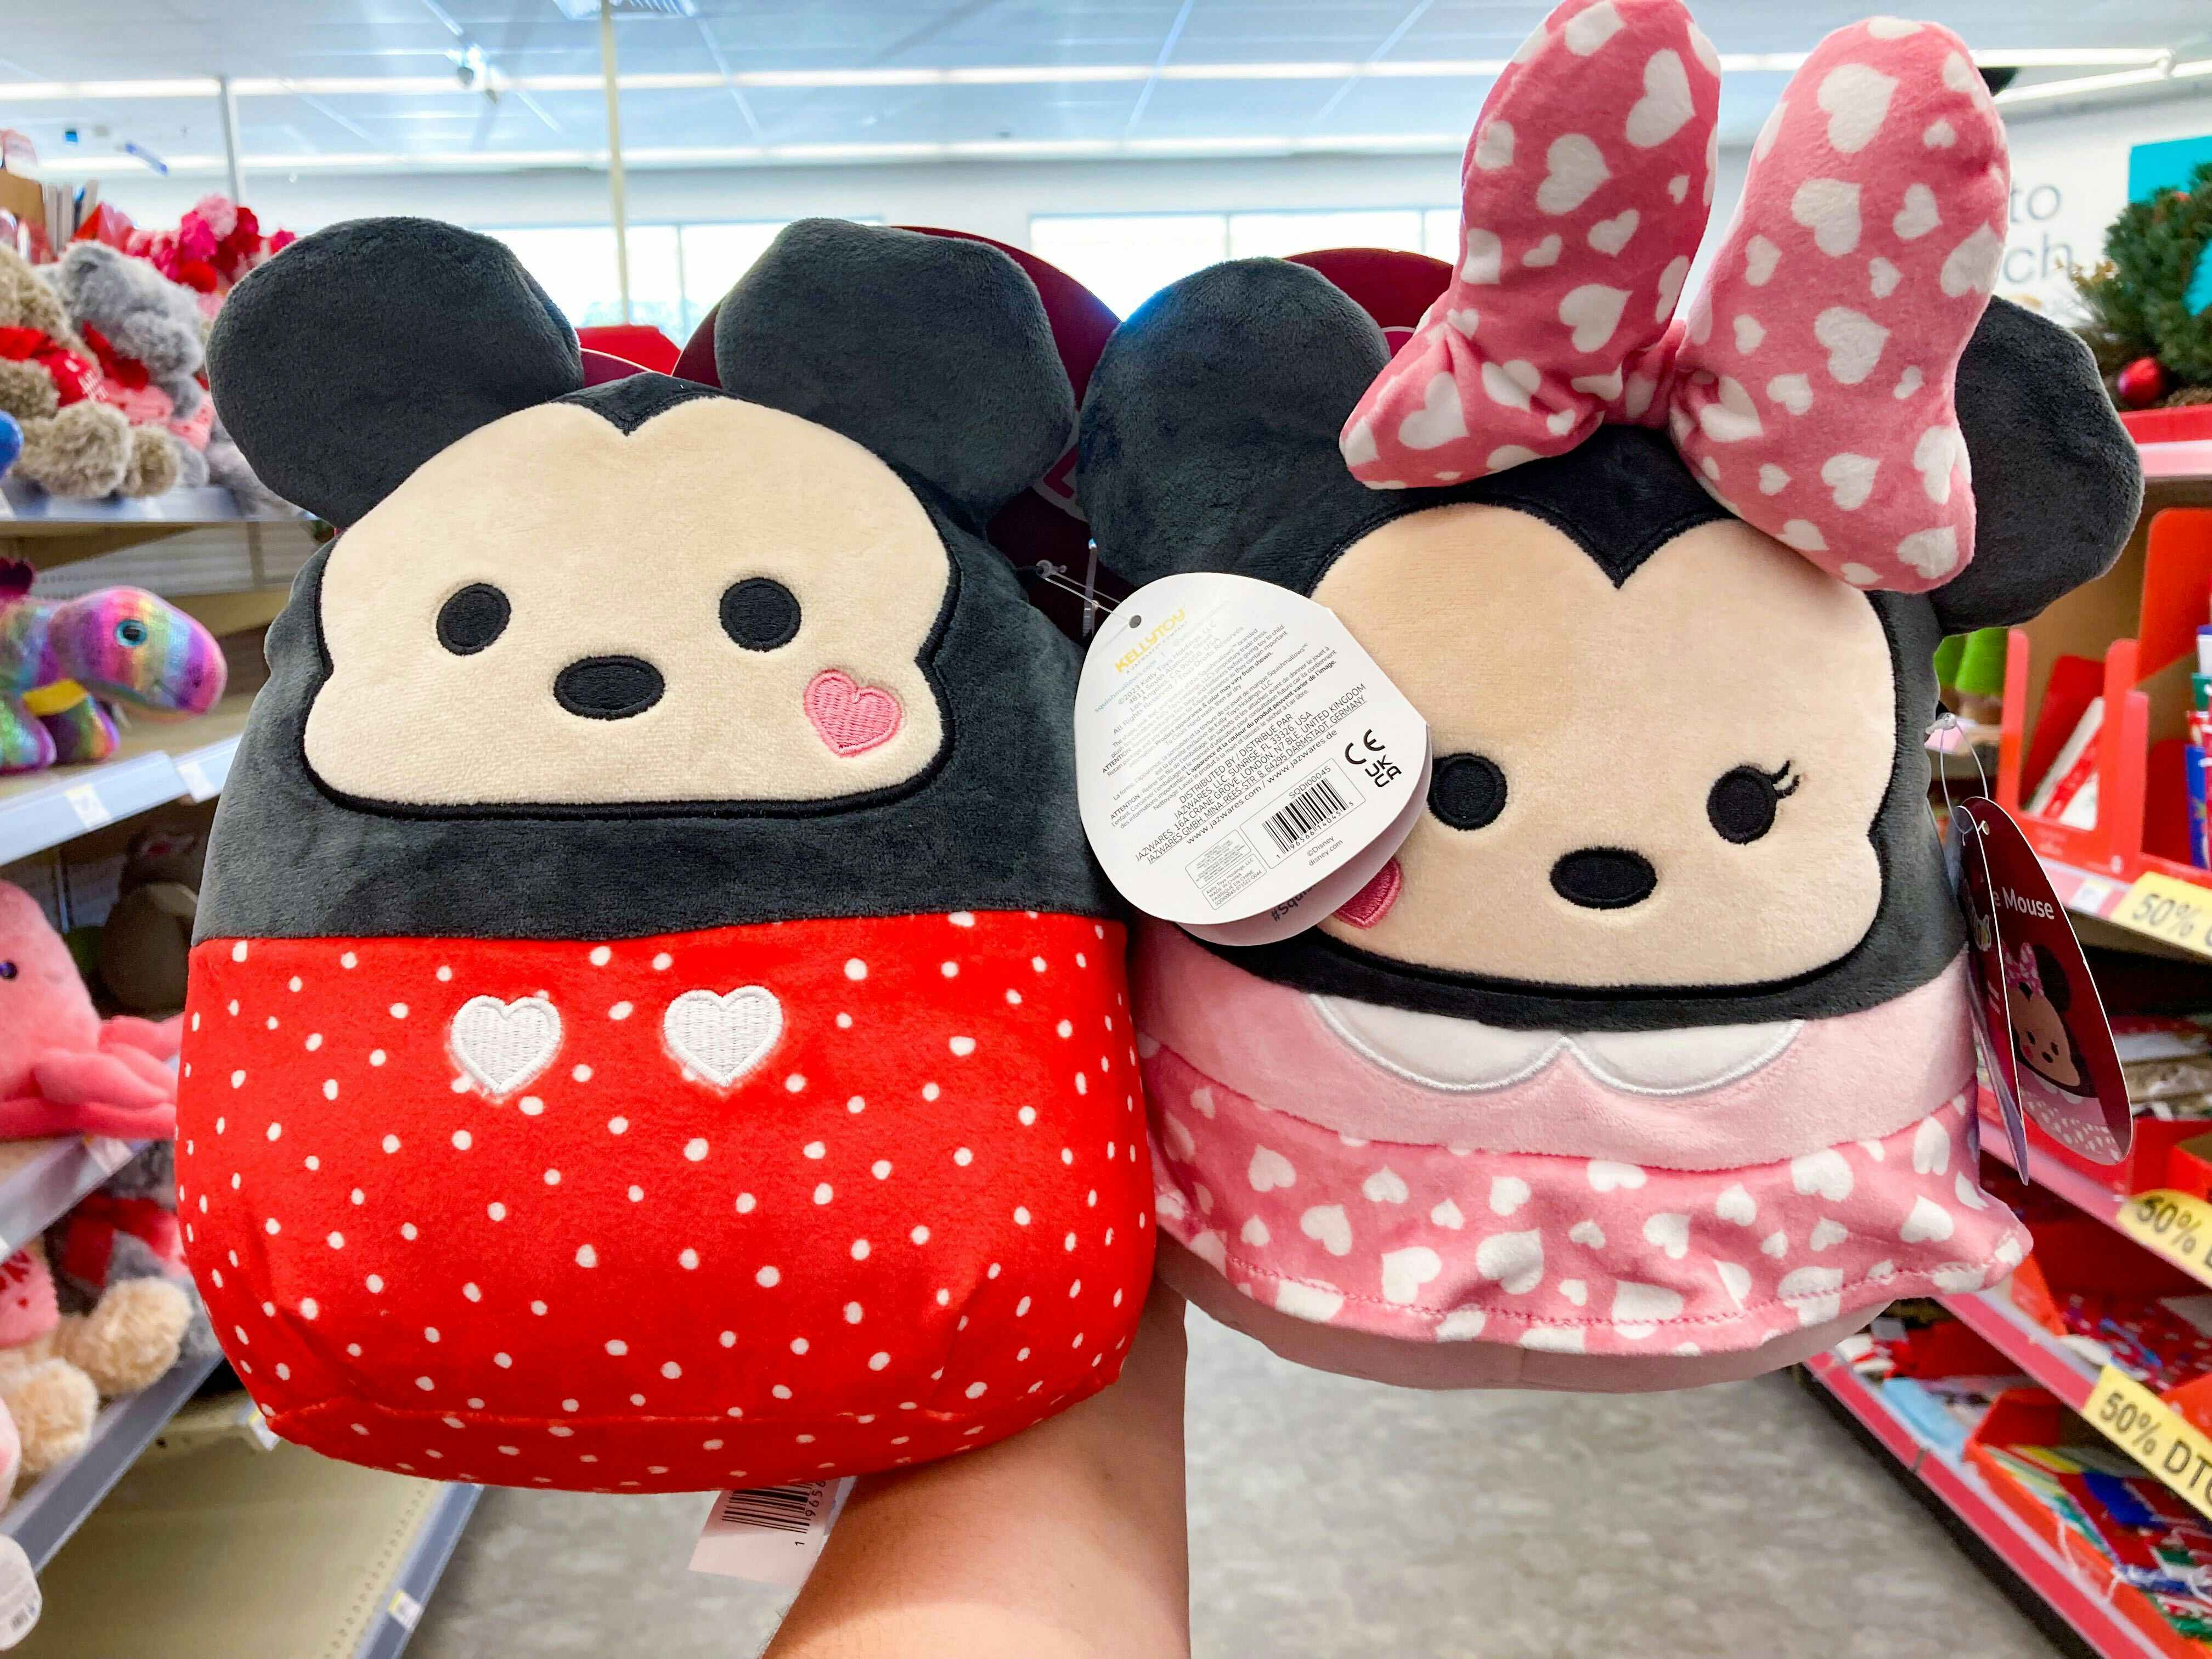 Someone holding up Mickey and Minnie Mouse Valentine's Day Squishmallows in Walgreens